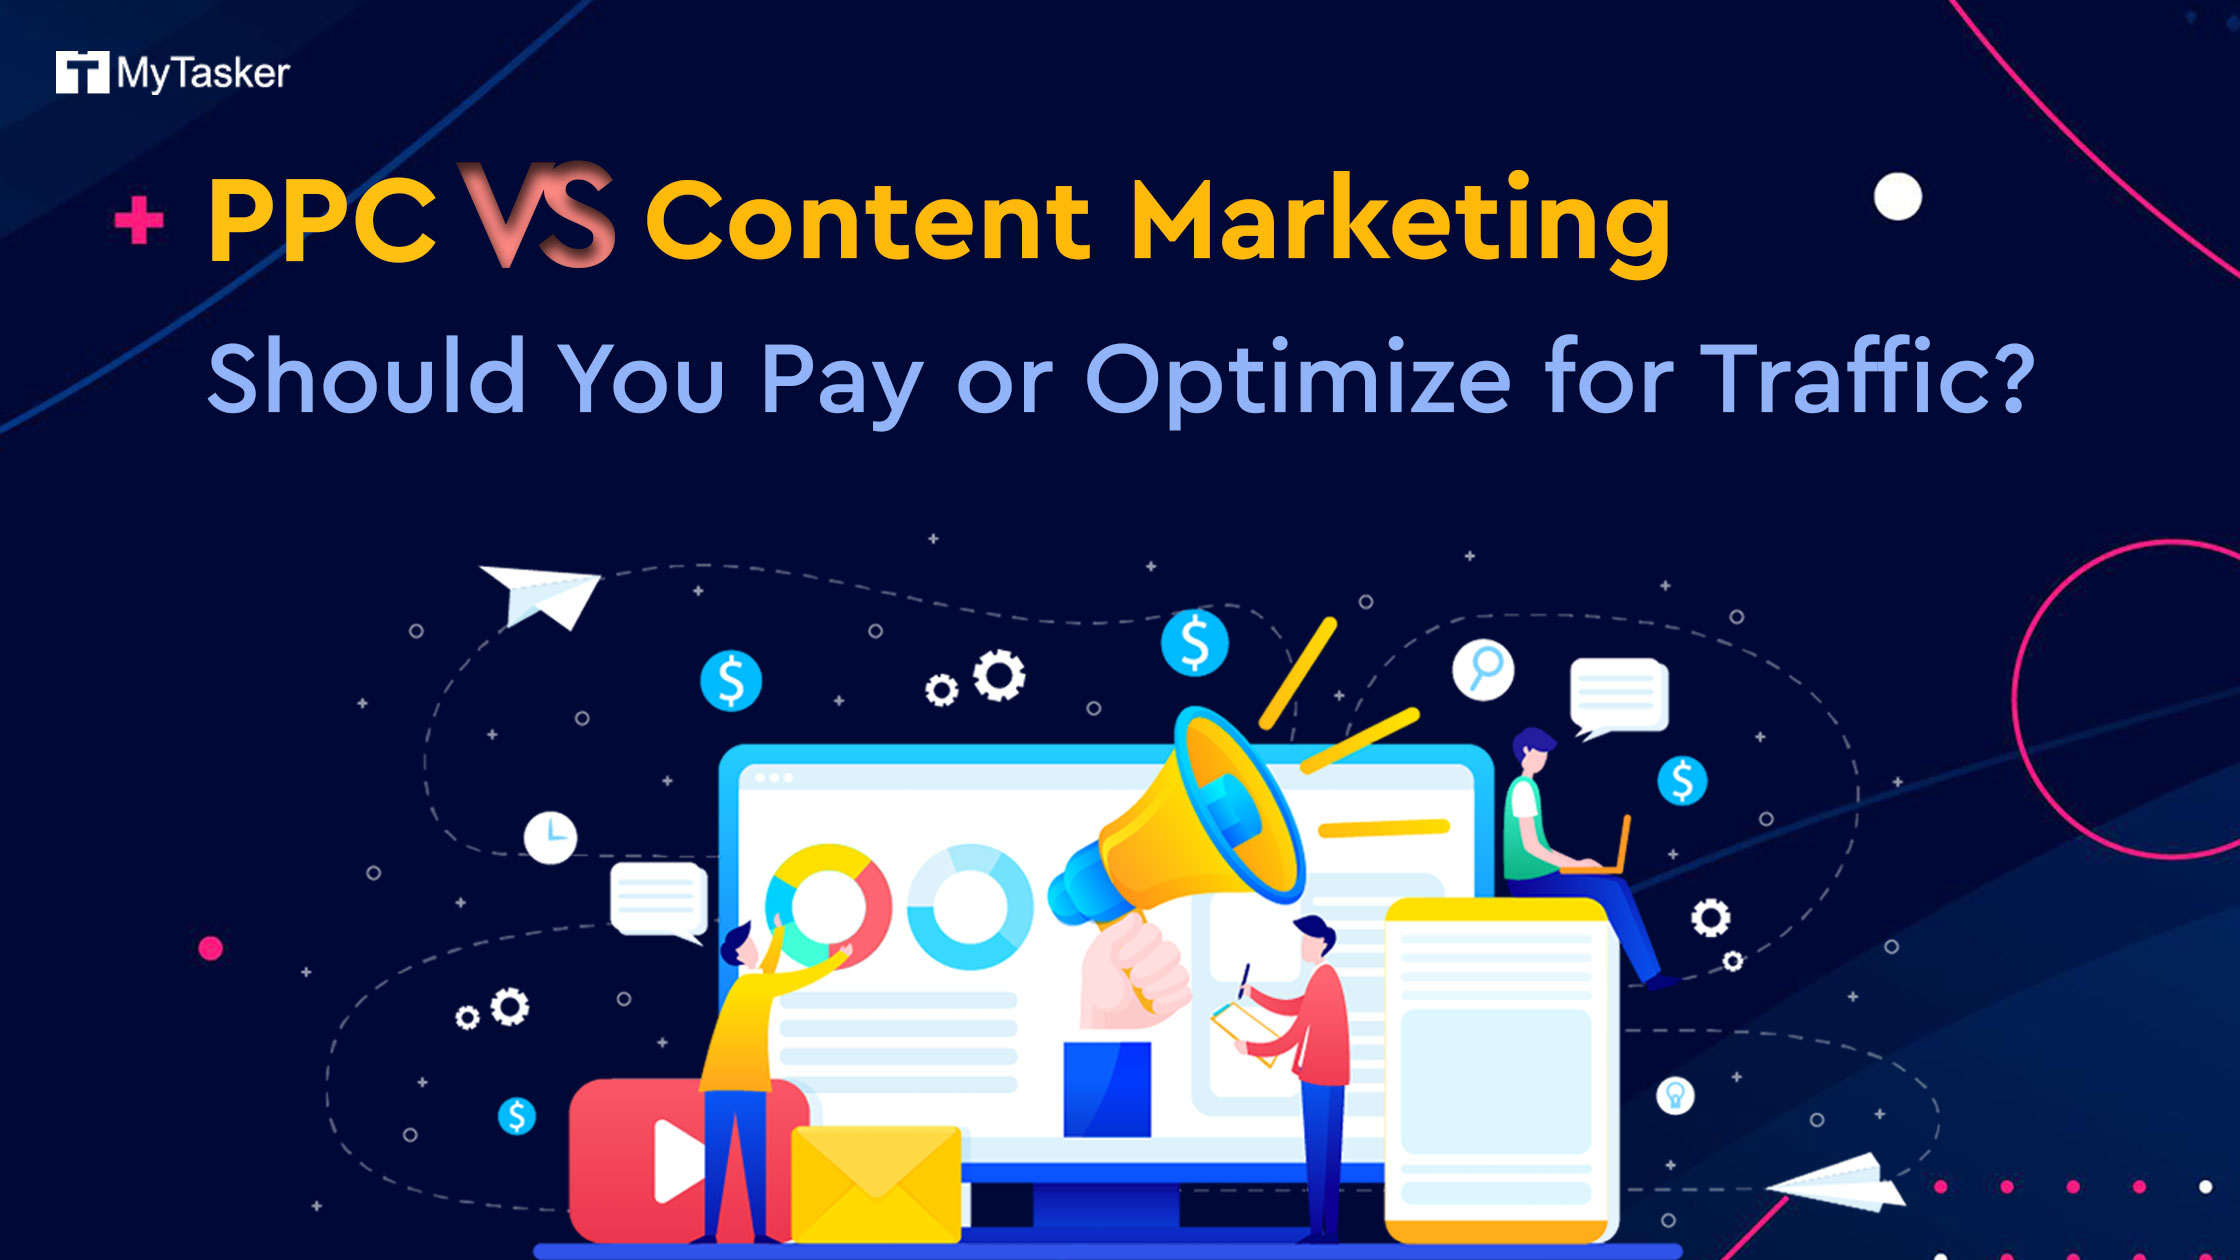 PPC Vs Content Marketing: Should You Pay or Optimize for Traffic?